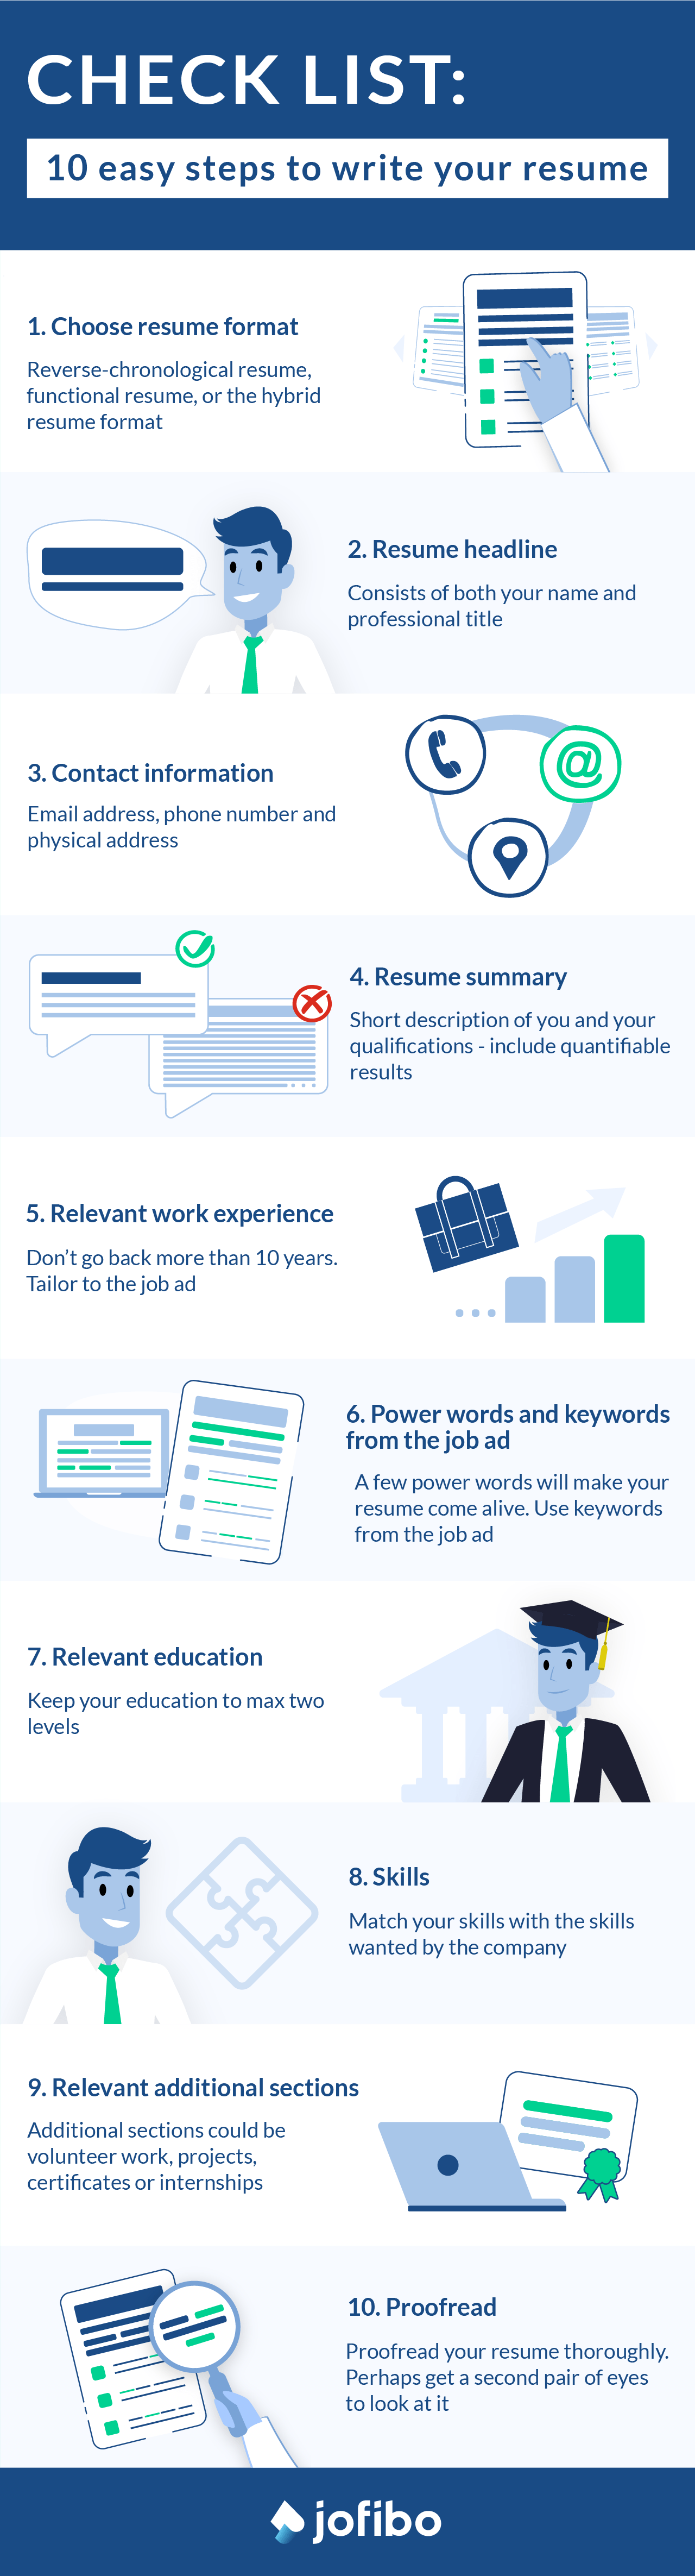 Infographic of how to write a resume with 10 steps